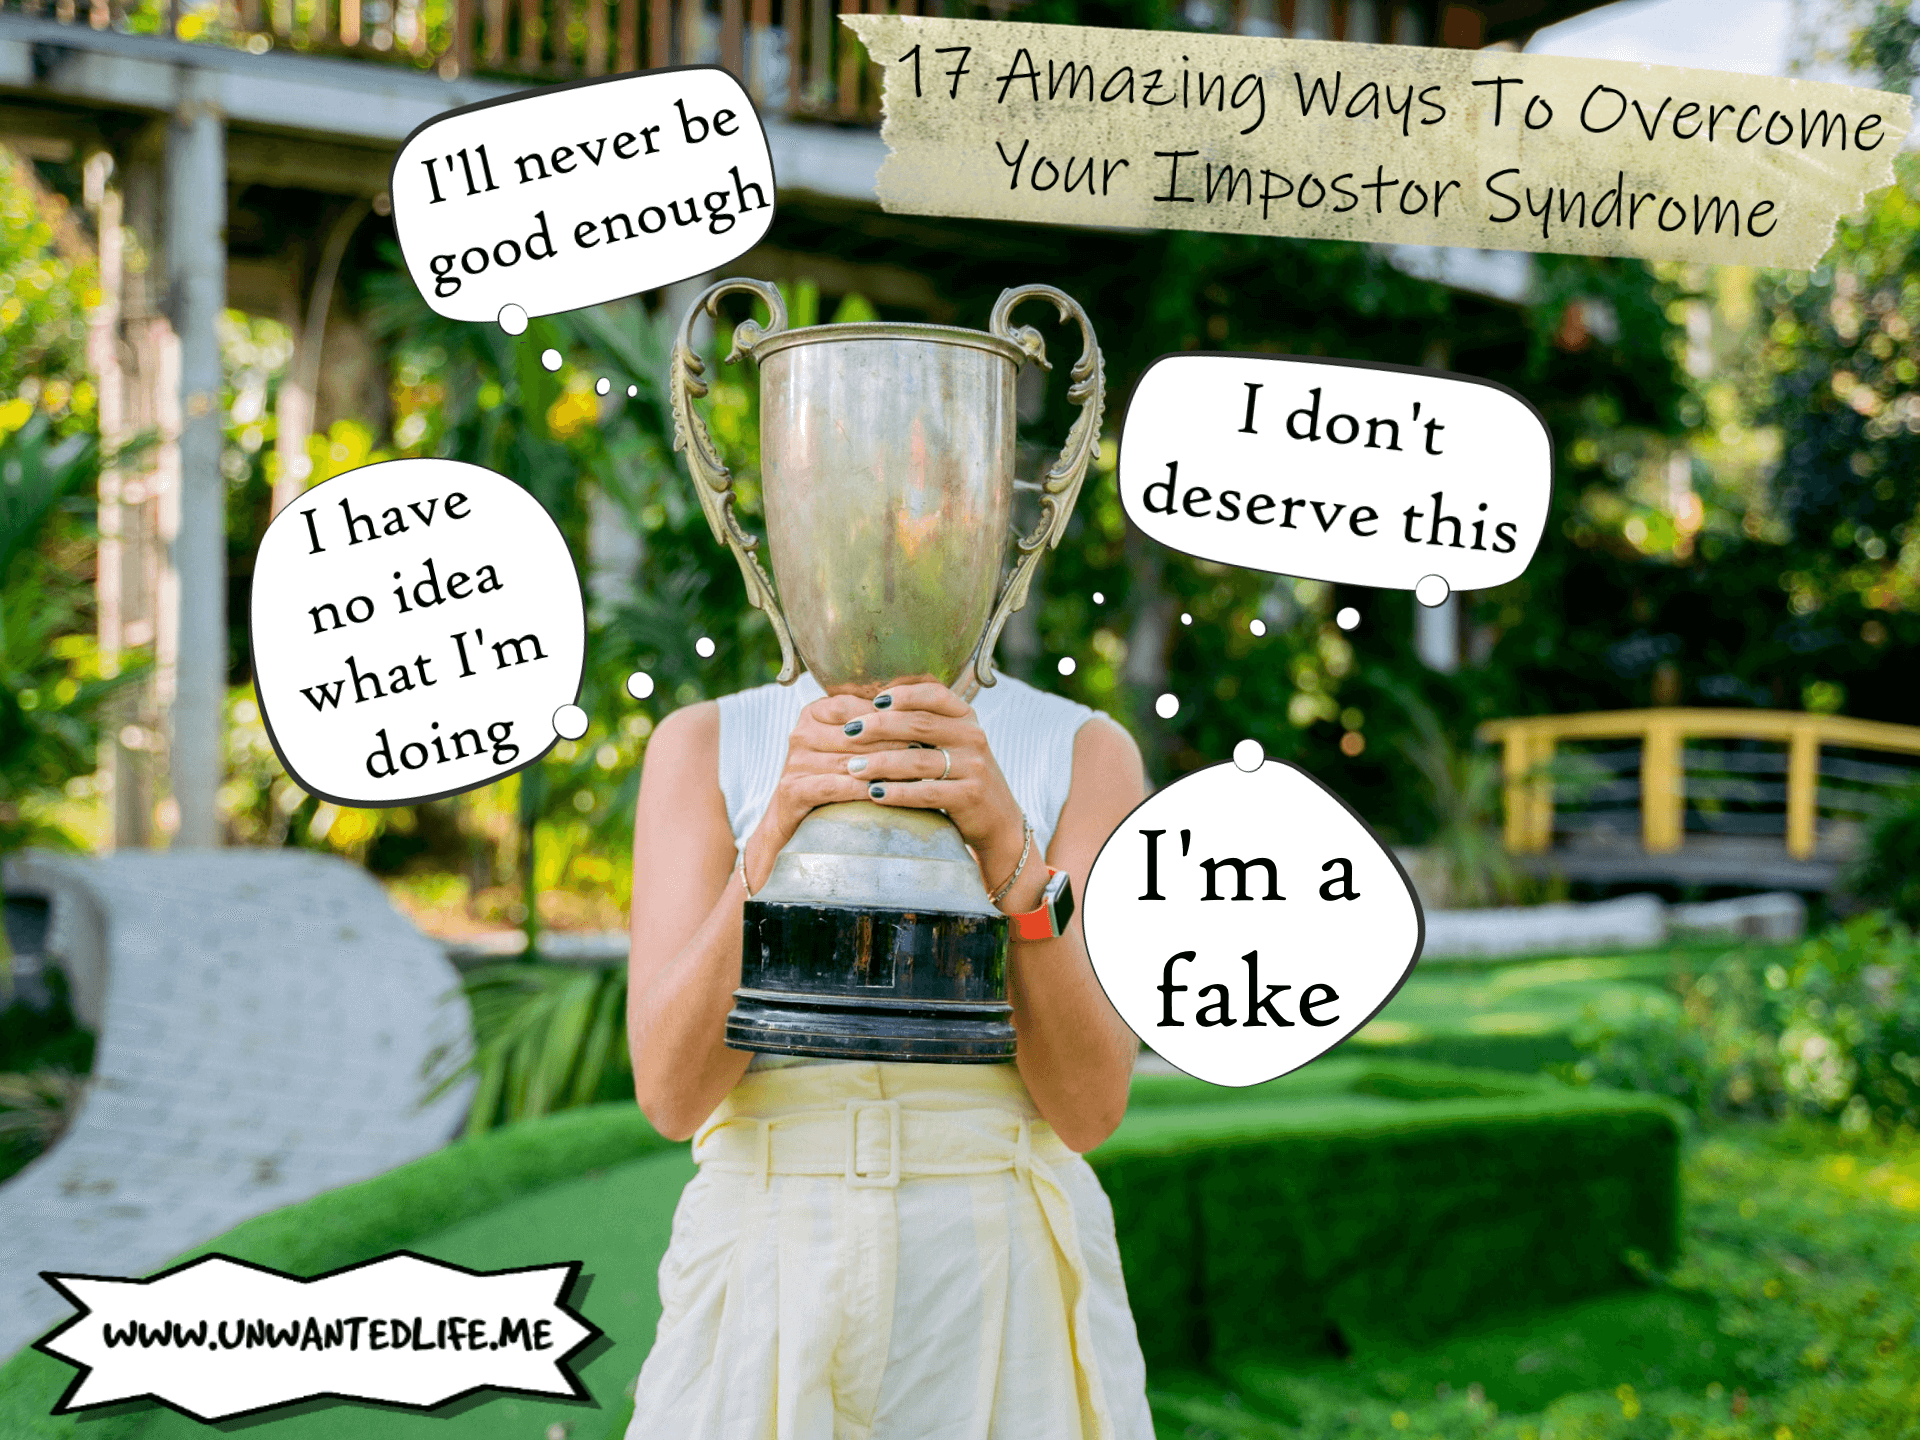 A photo of a woman hiding behind a trophy she's won surrounded by thought bubbles that say she's a fake or didn't deserve the award, to represent the topic of the article - 17 Amazing Ways To Overcome Your Impostor Syndrome